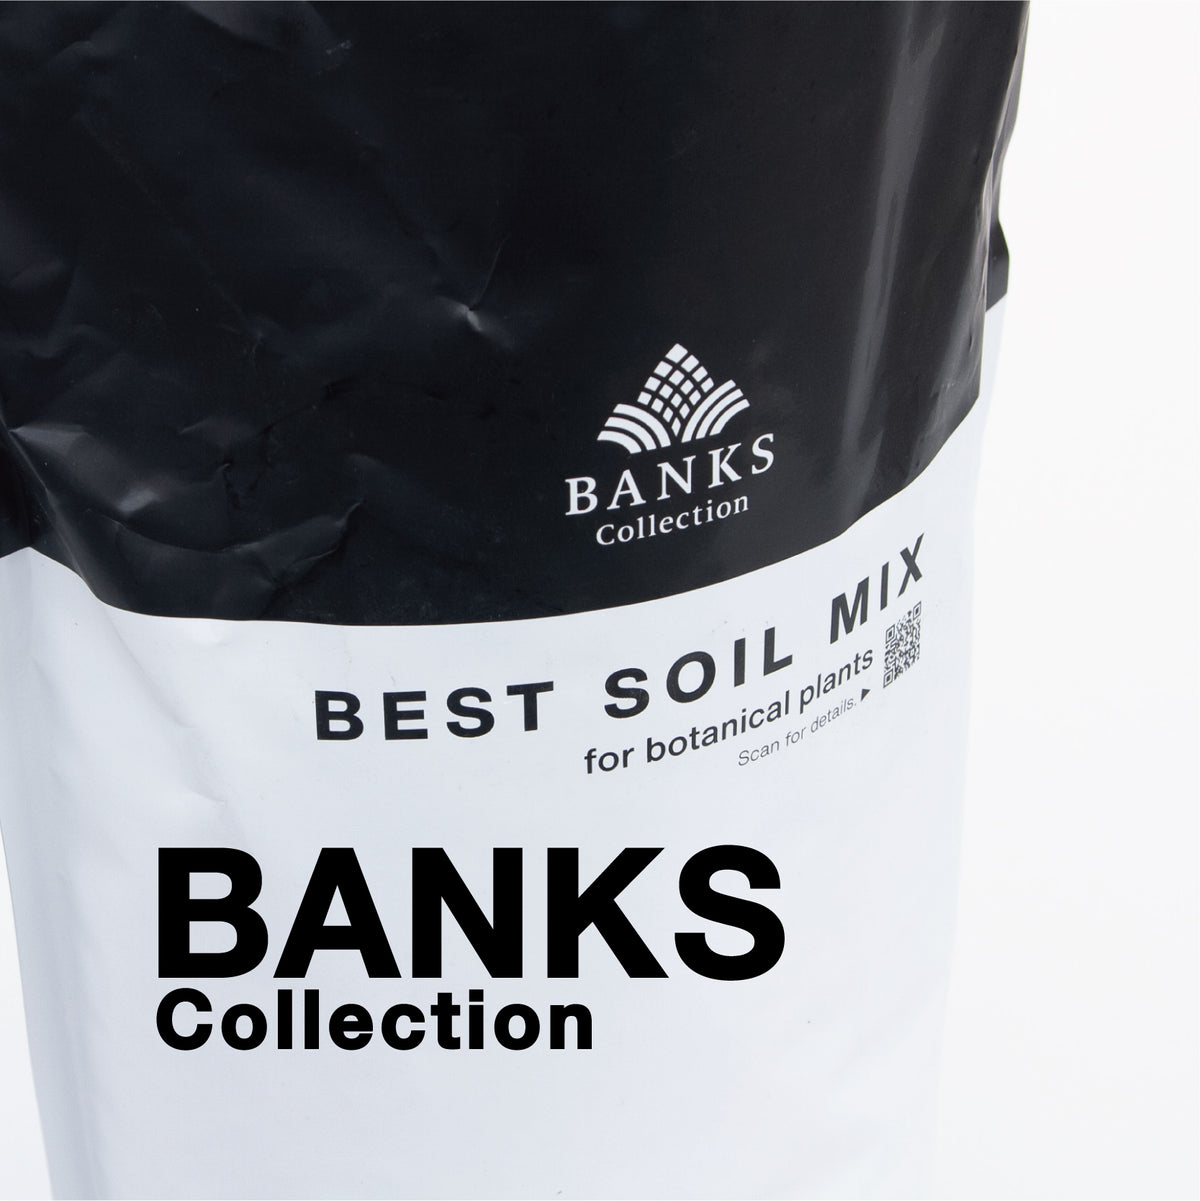 BANKS Collection